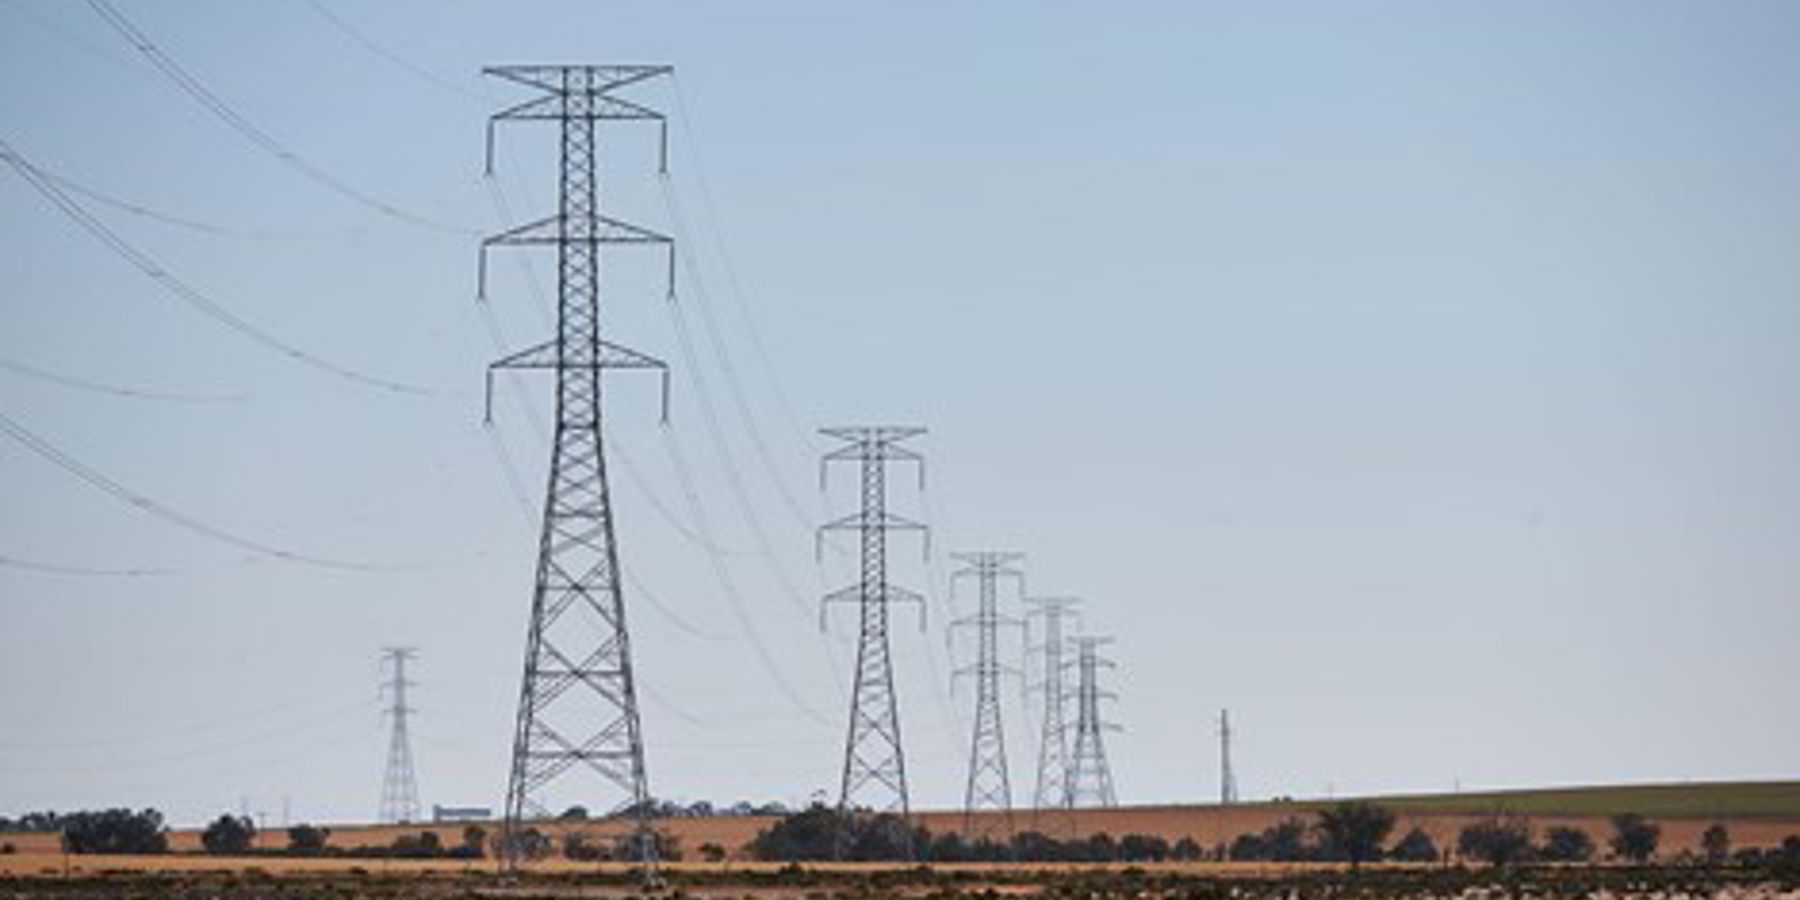 Fields with double circuit electricity transmission towers and lines in row continuing into the distance